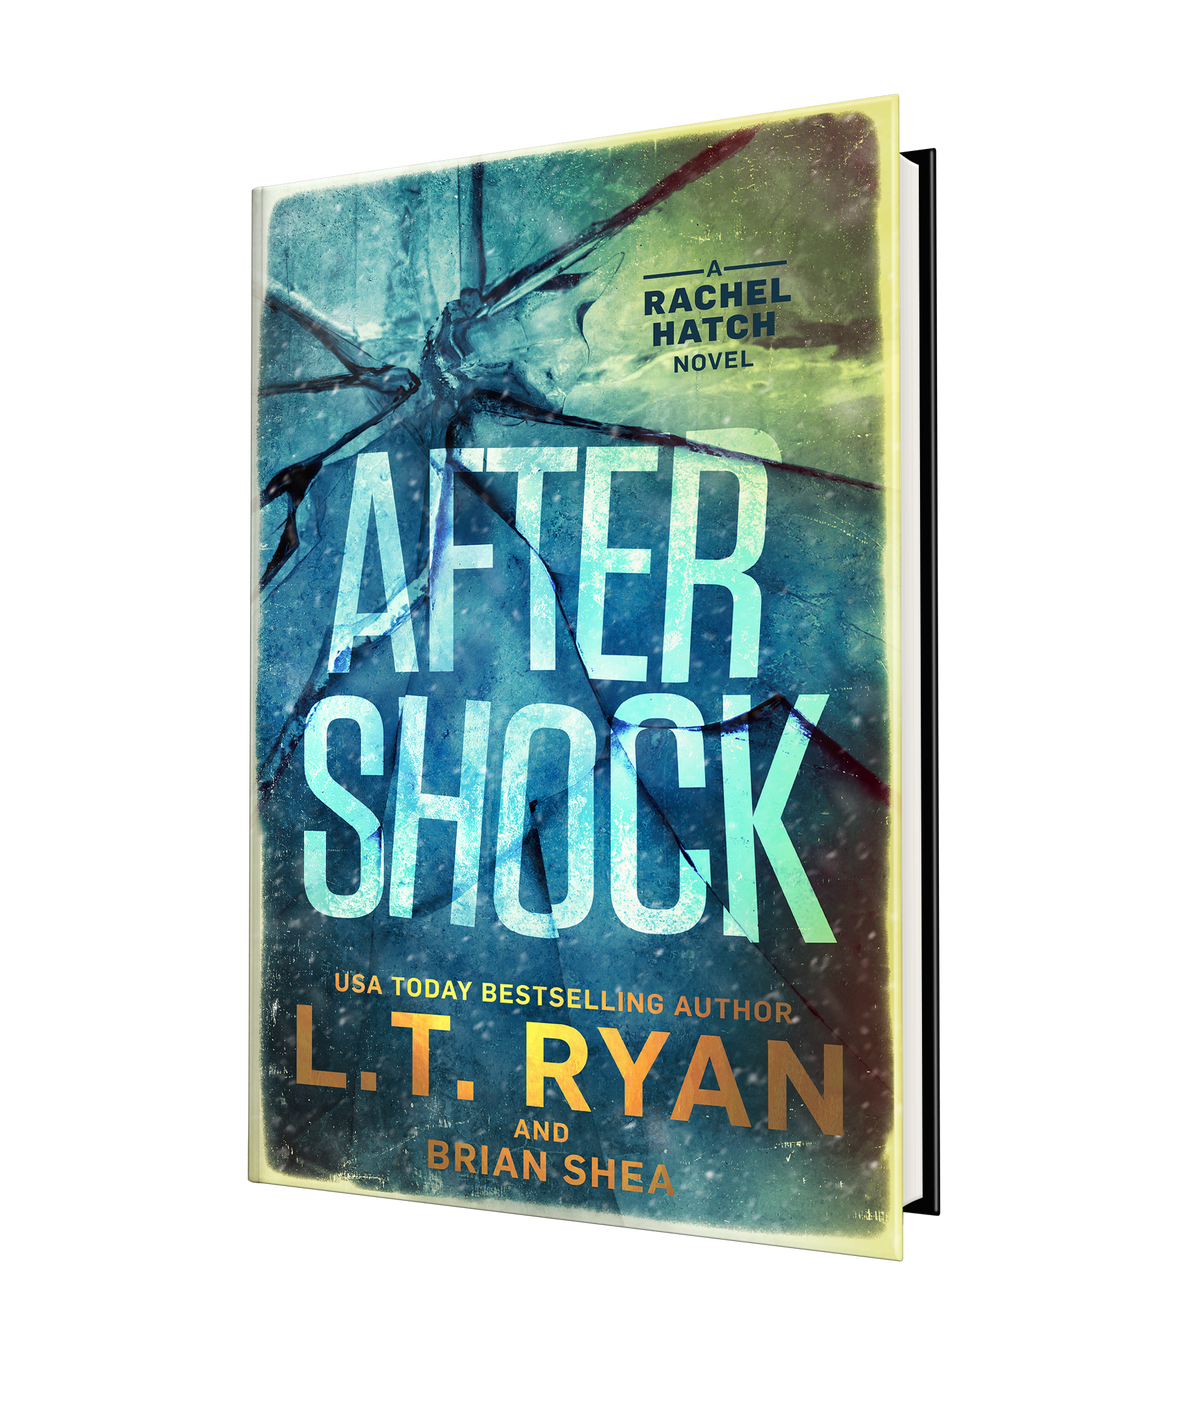 Aftershock: Signed by the Author